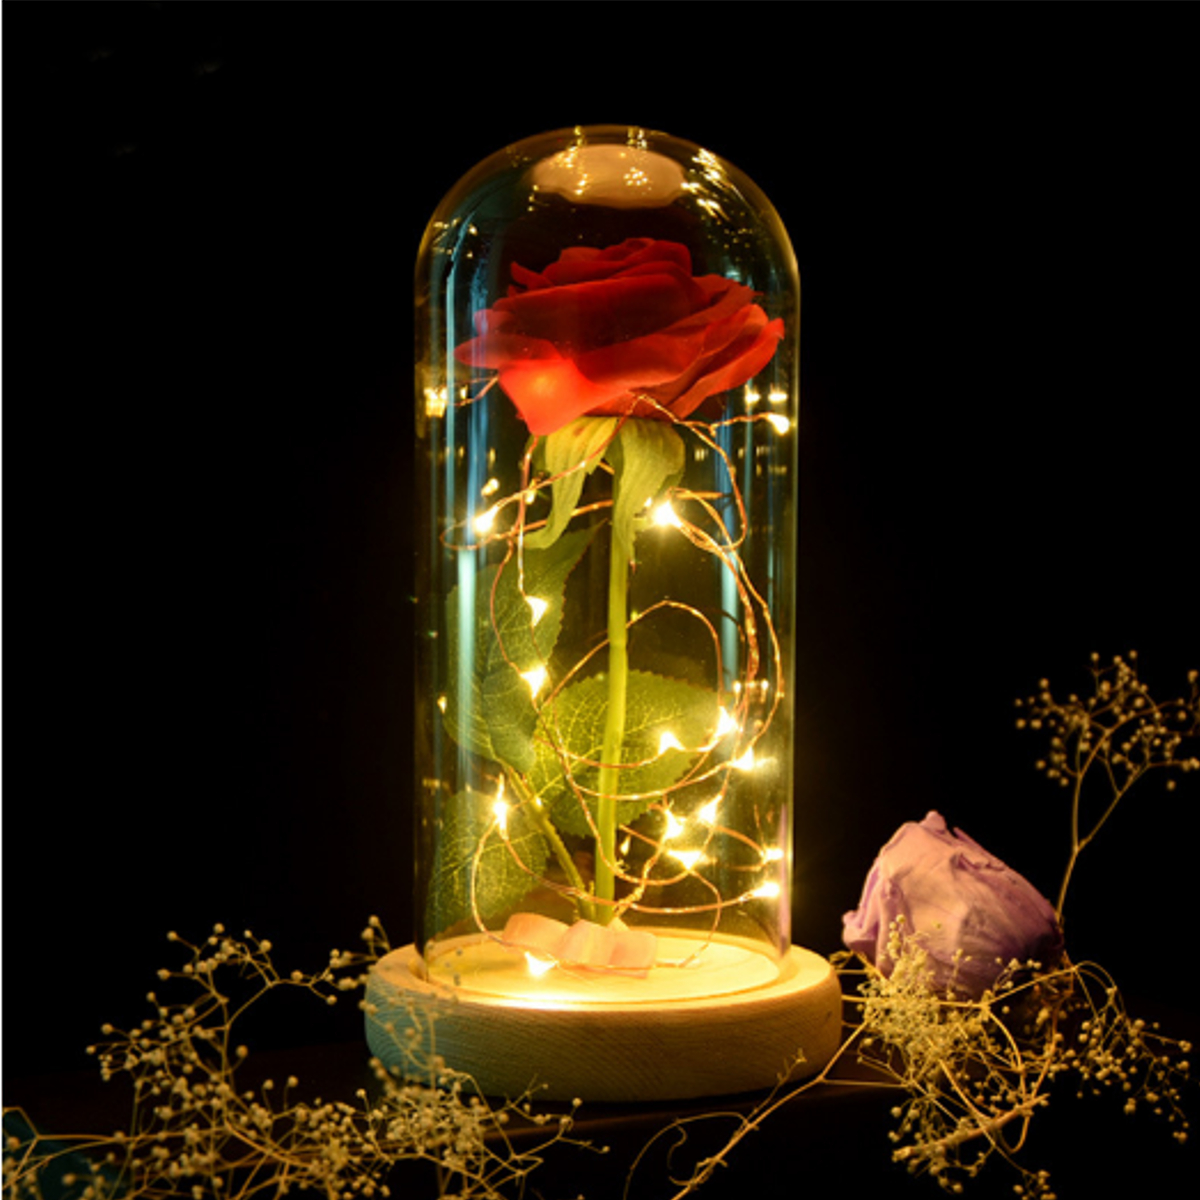 Red-Rose-Lights-Decorations-Beauty-Enchanted-Preserved-Red-Fresh-Rose-Glass-Cover-with-LED-Light-1256507-7